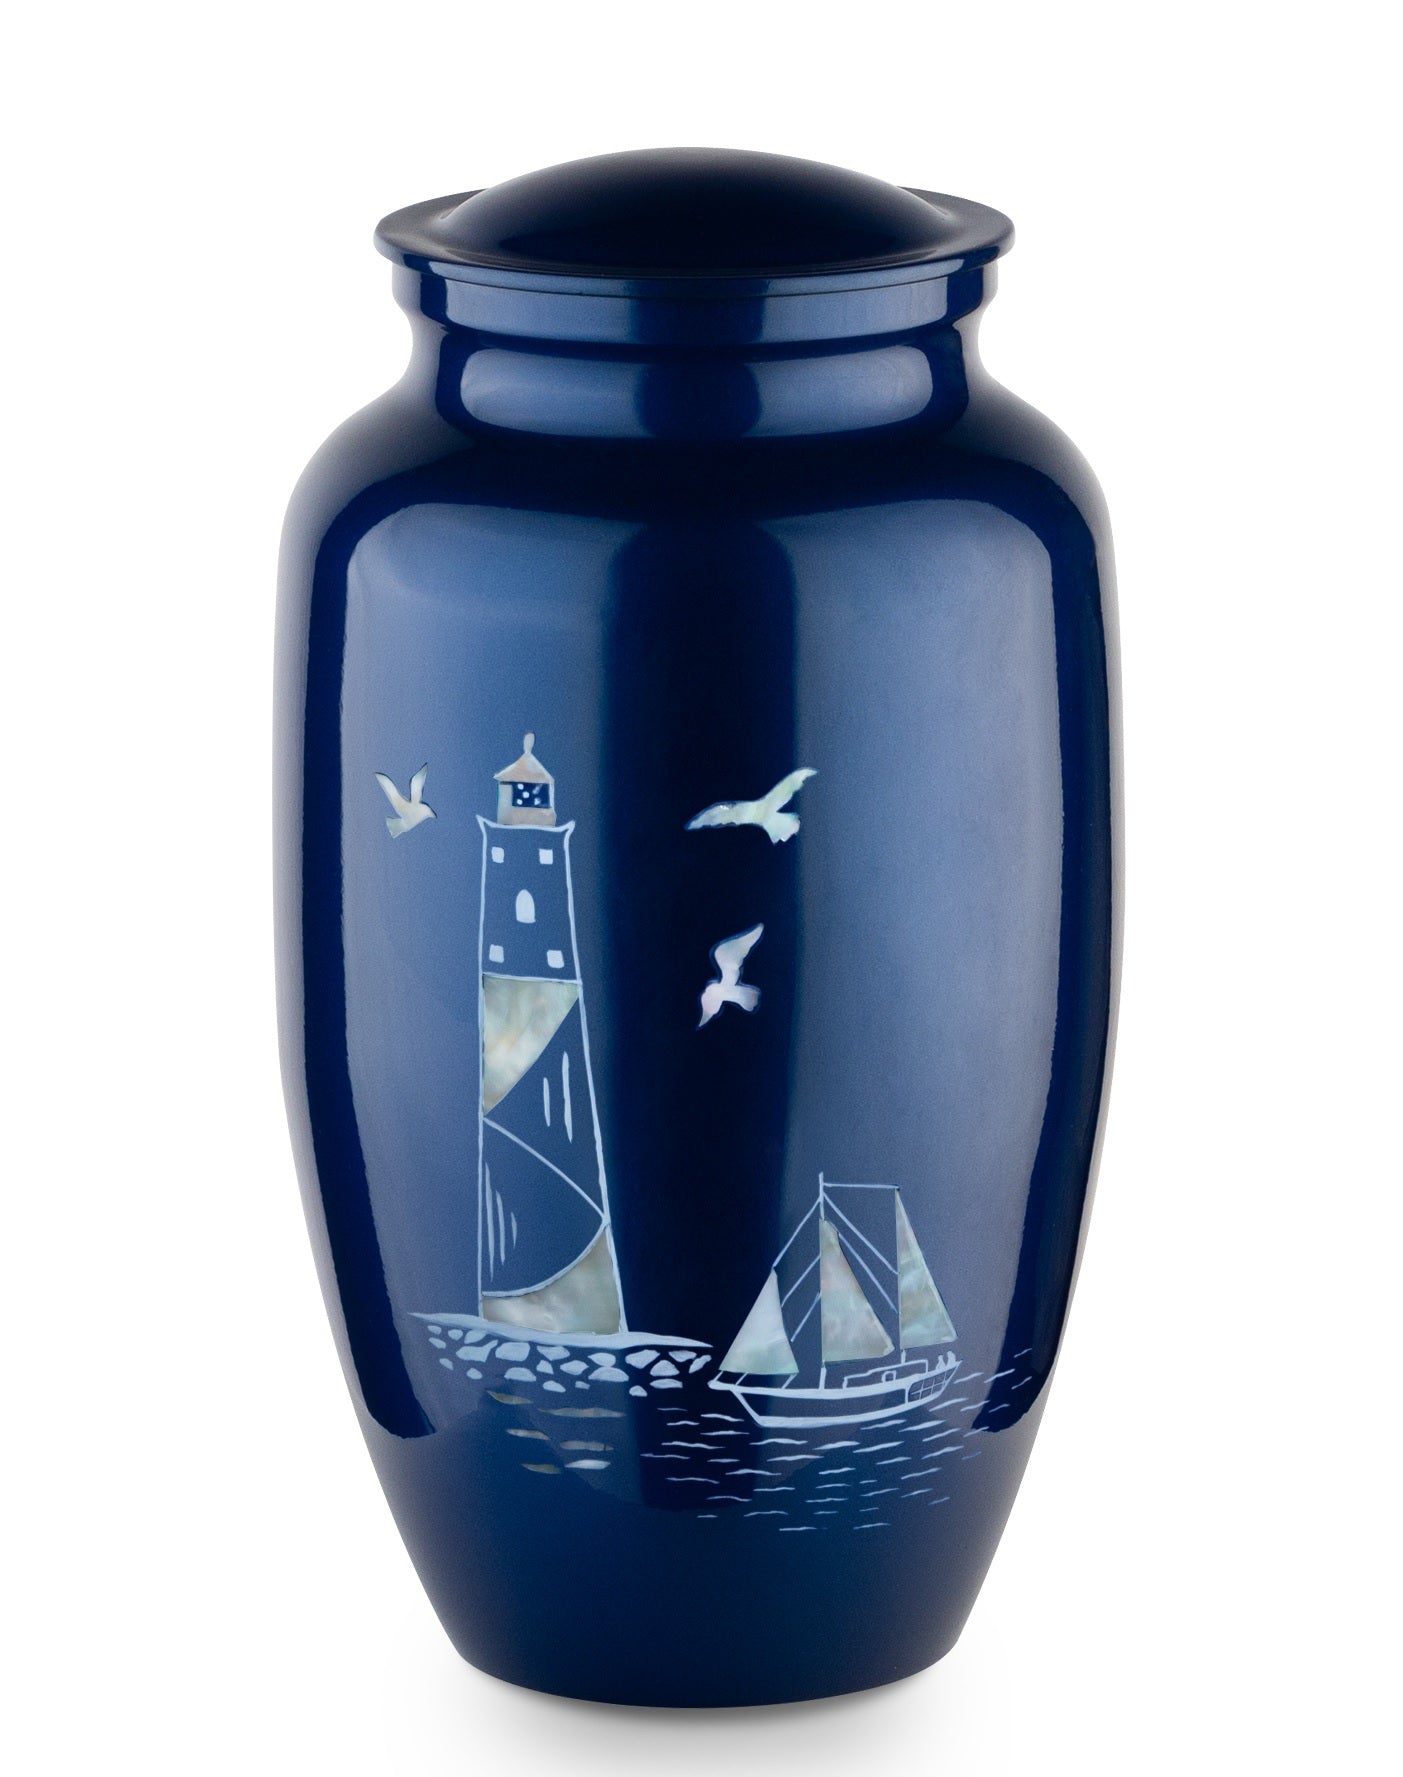 Blue Lighthouse Urn – Quality Urns & Statues For Less